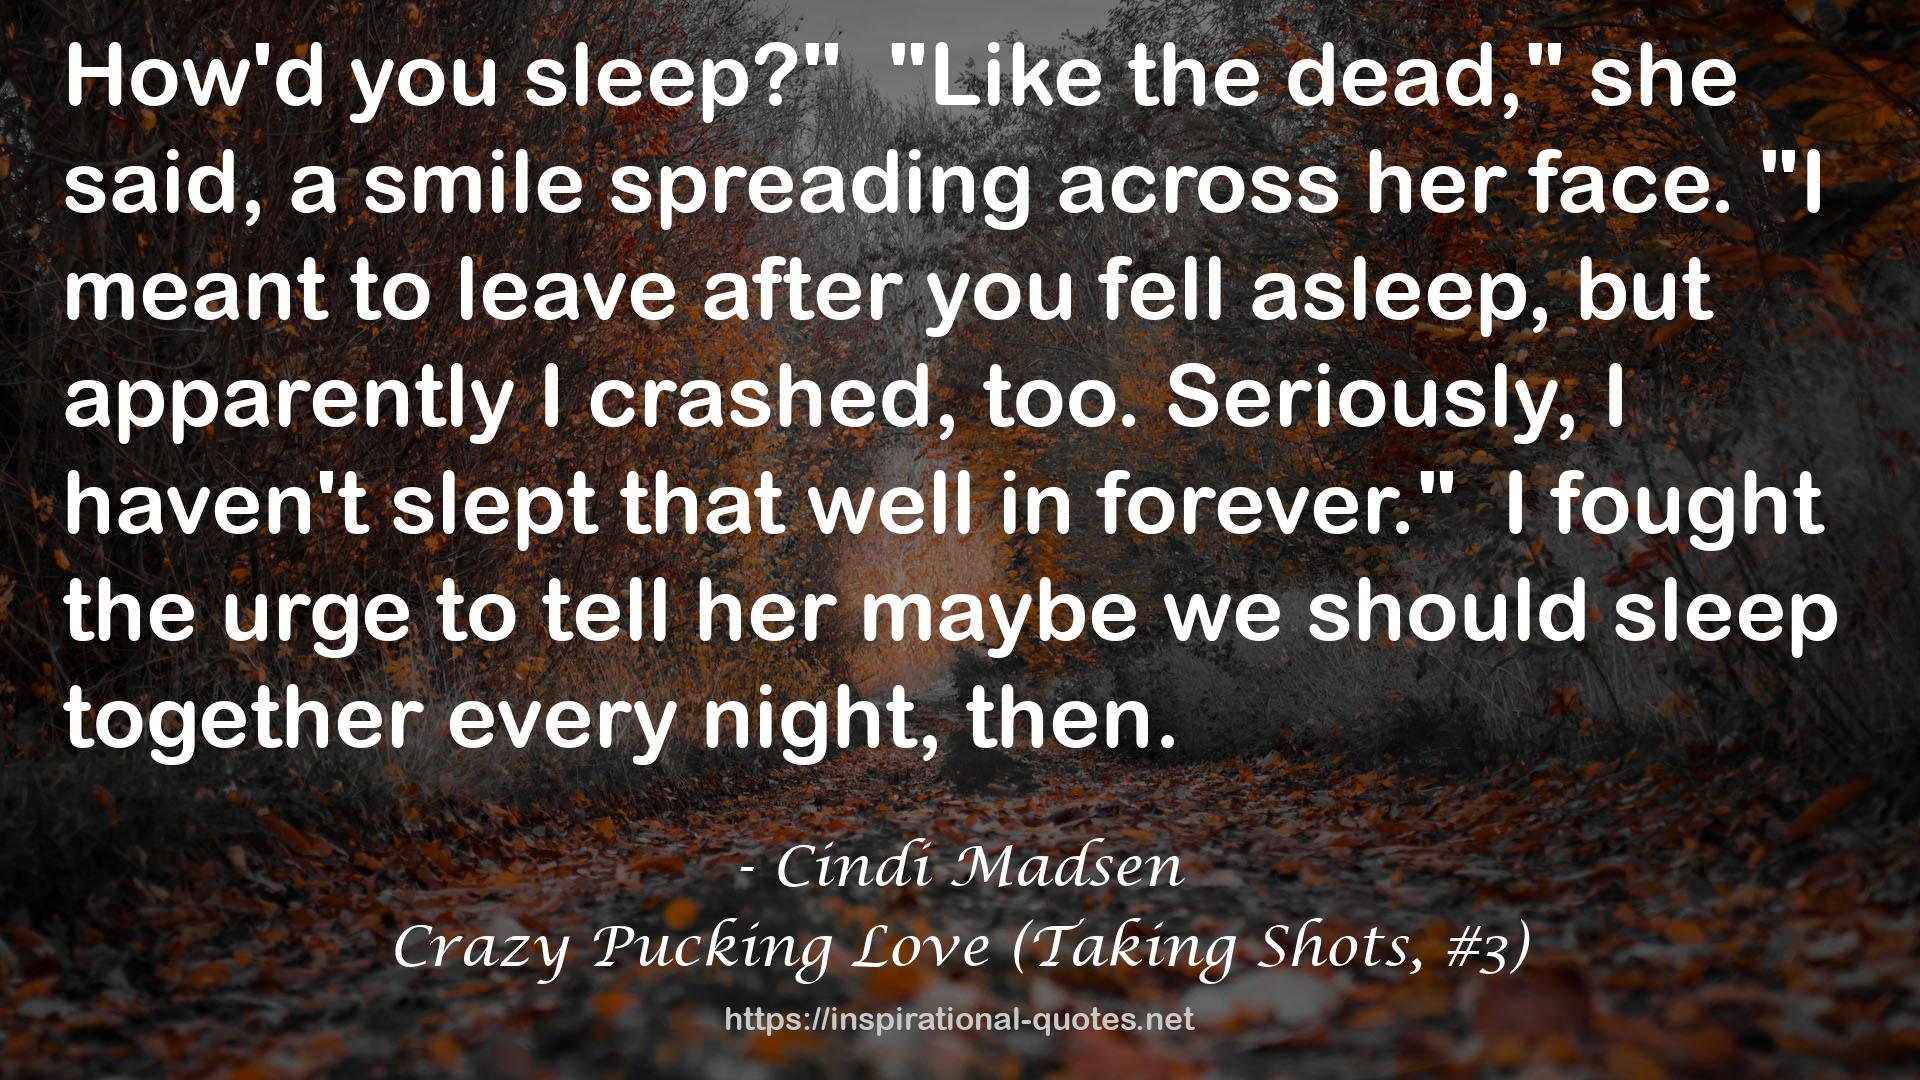 Crazy Pucking Love (Taking Shots, #3) QUOTES